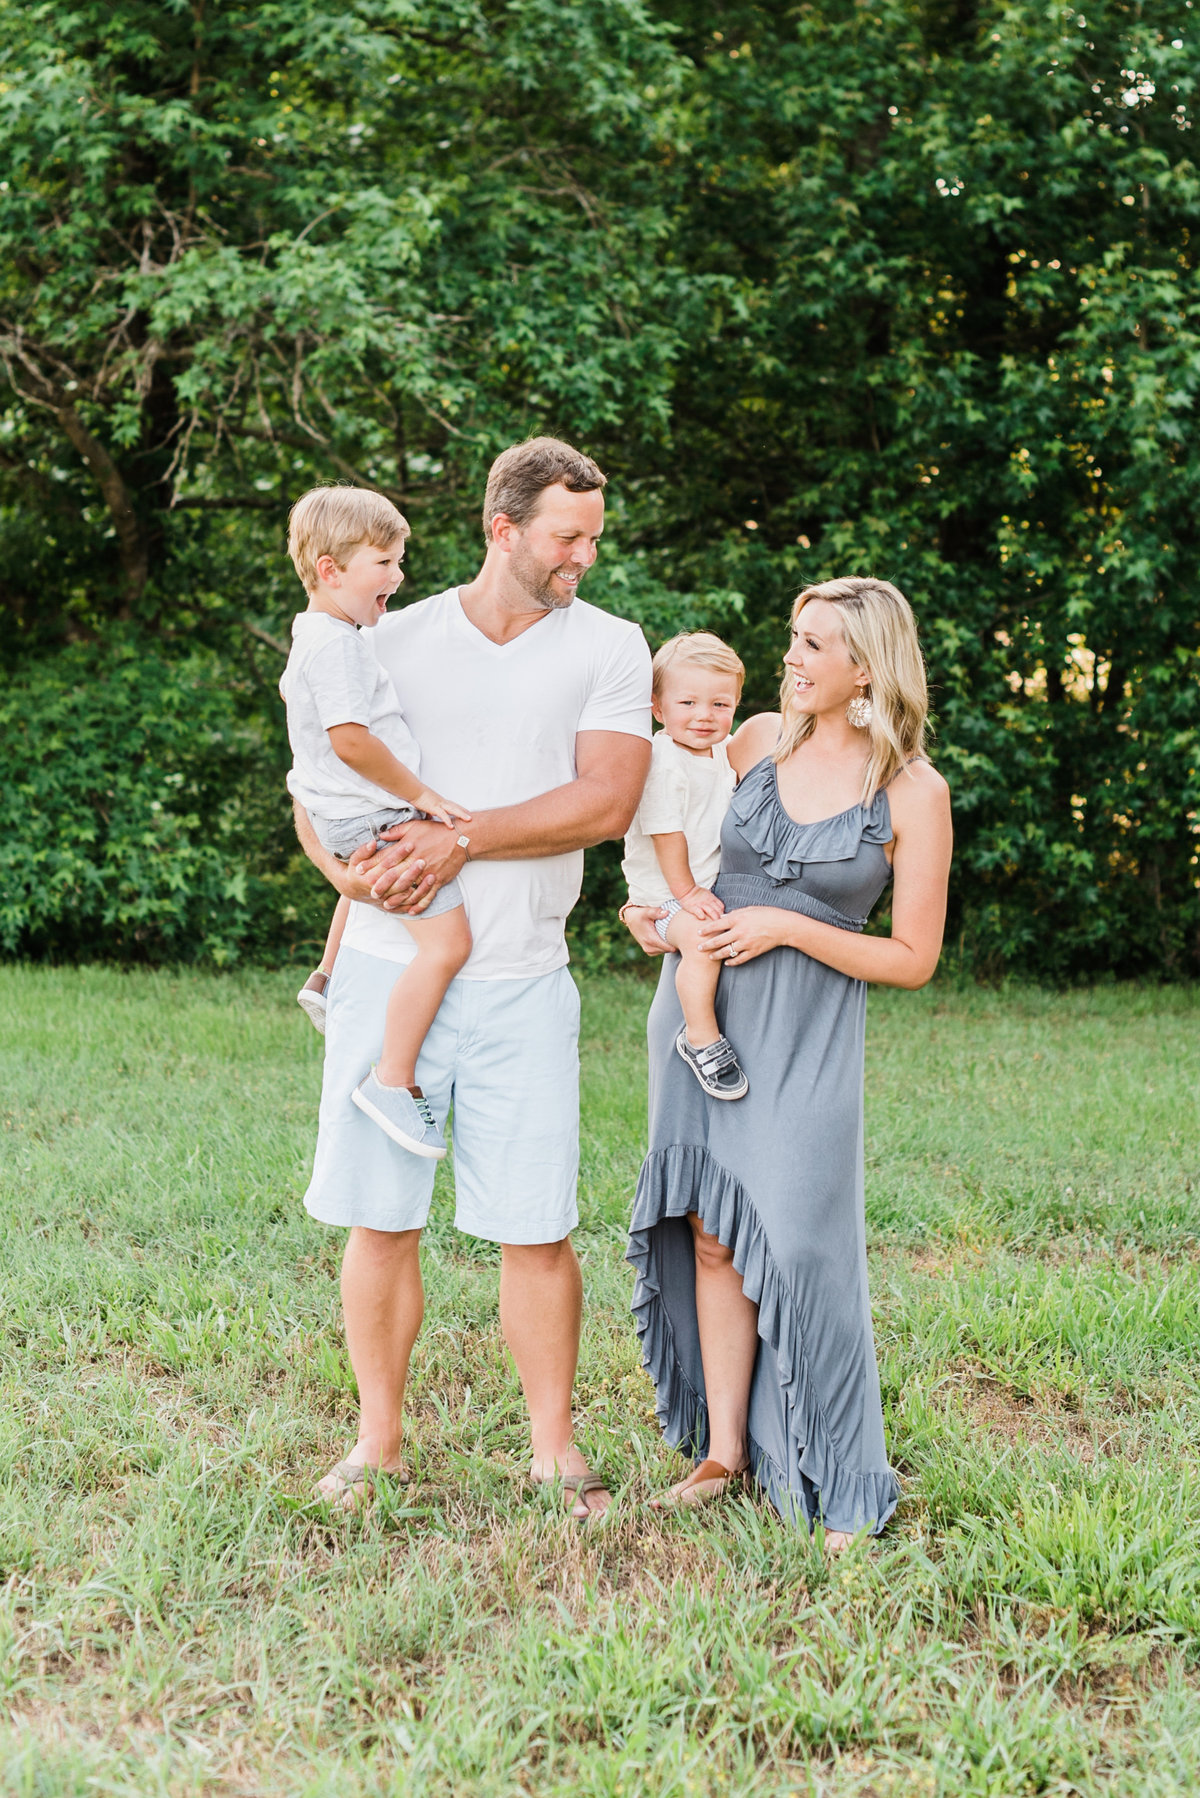 Family pauses for a photo together in a field during their Raleigh family photo session. Photographed by Raleigh NC family photographer A.J. Dunlap Photography.